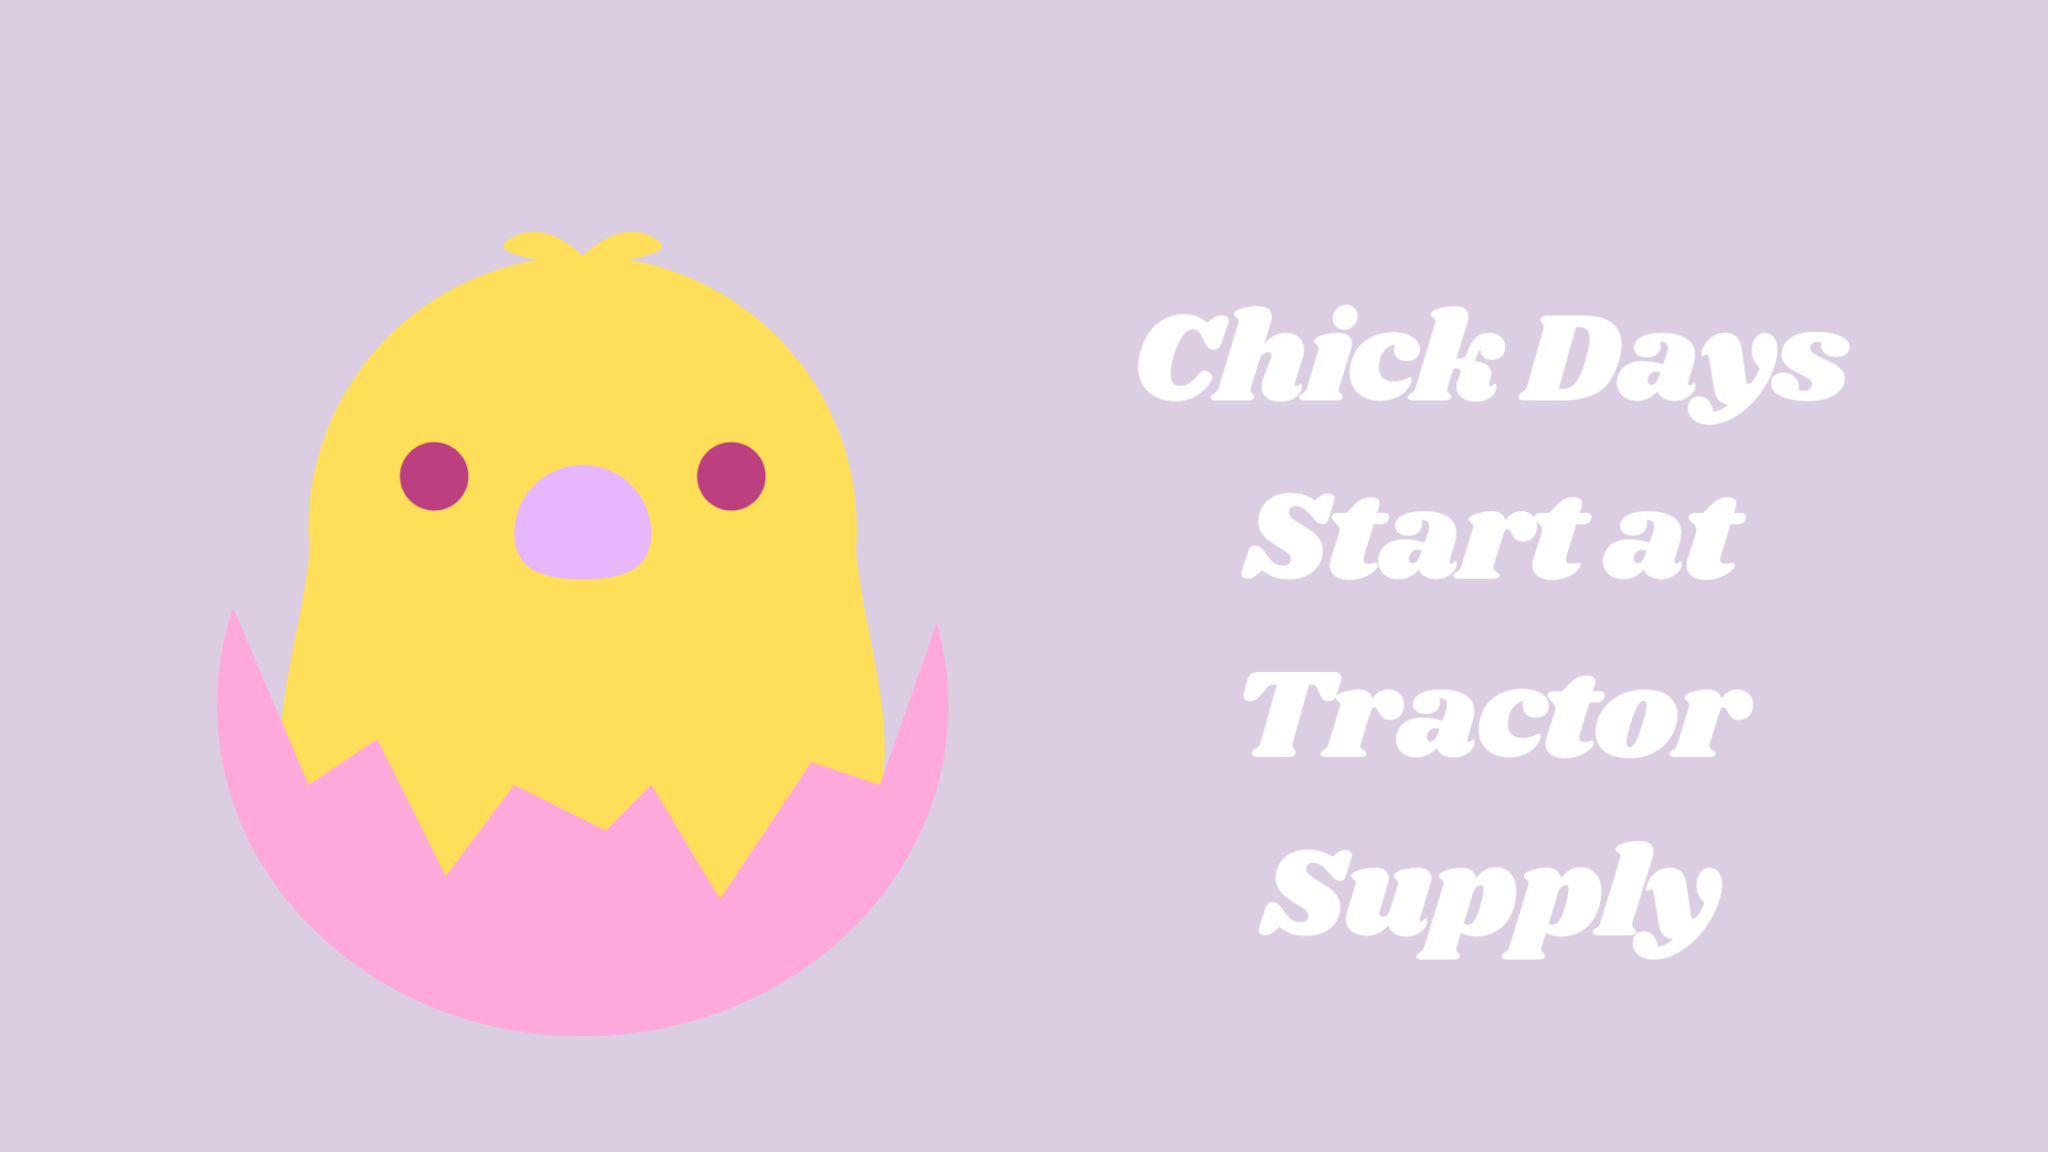 When Does Tractor Supply Get New Chicks? (days, Months + Other FAQ